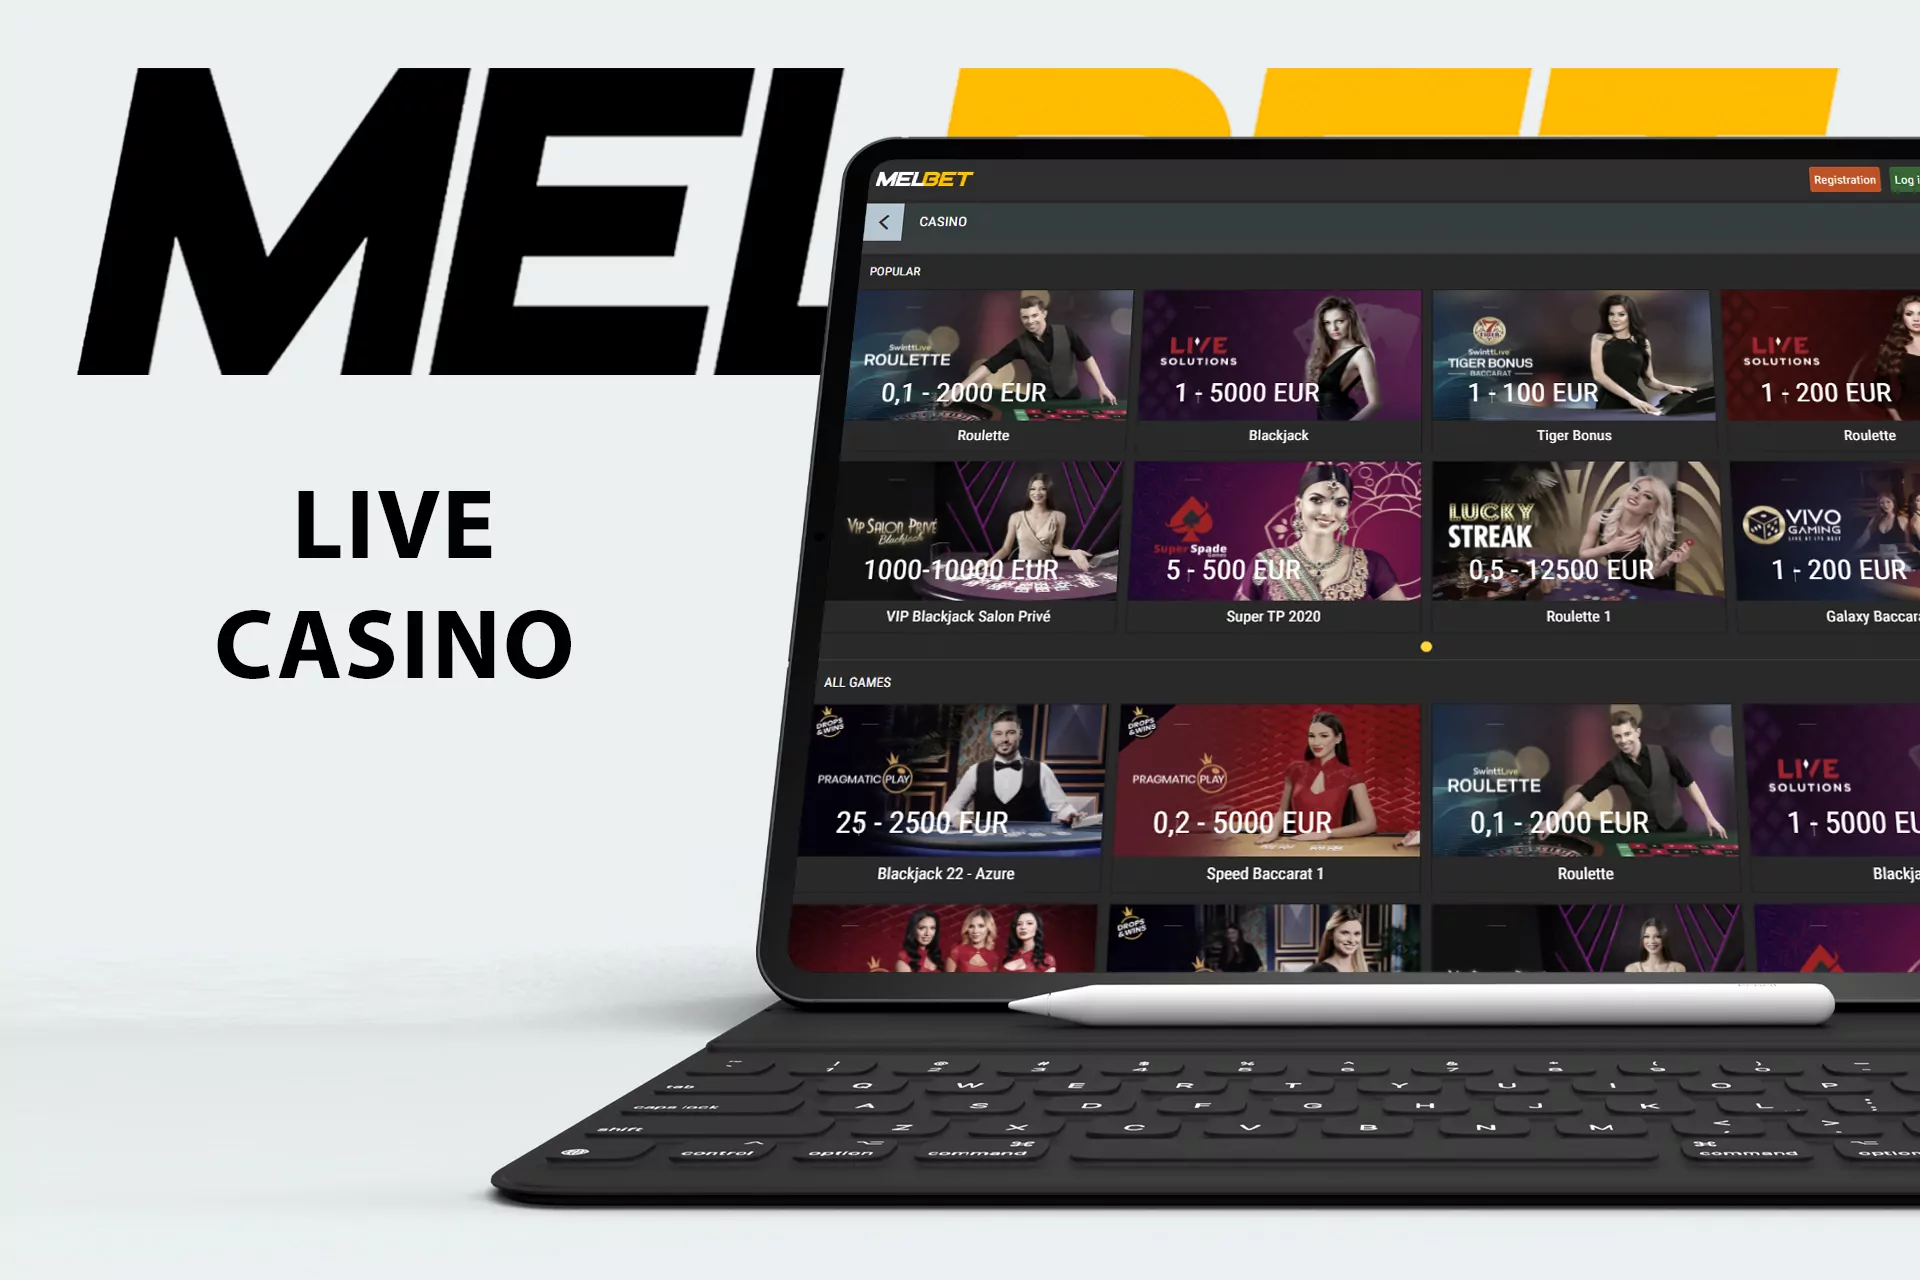 Melbet live casino section is available for playing with real dealers.